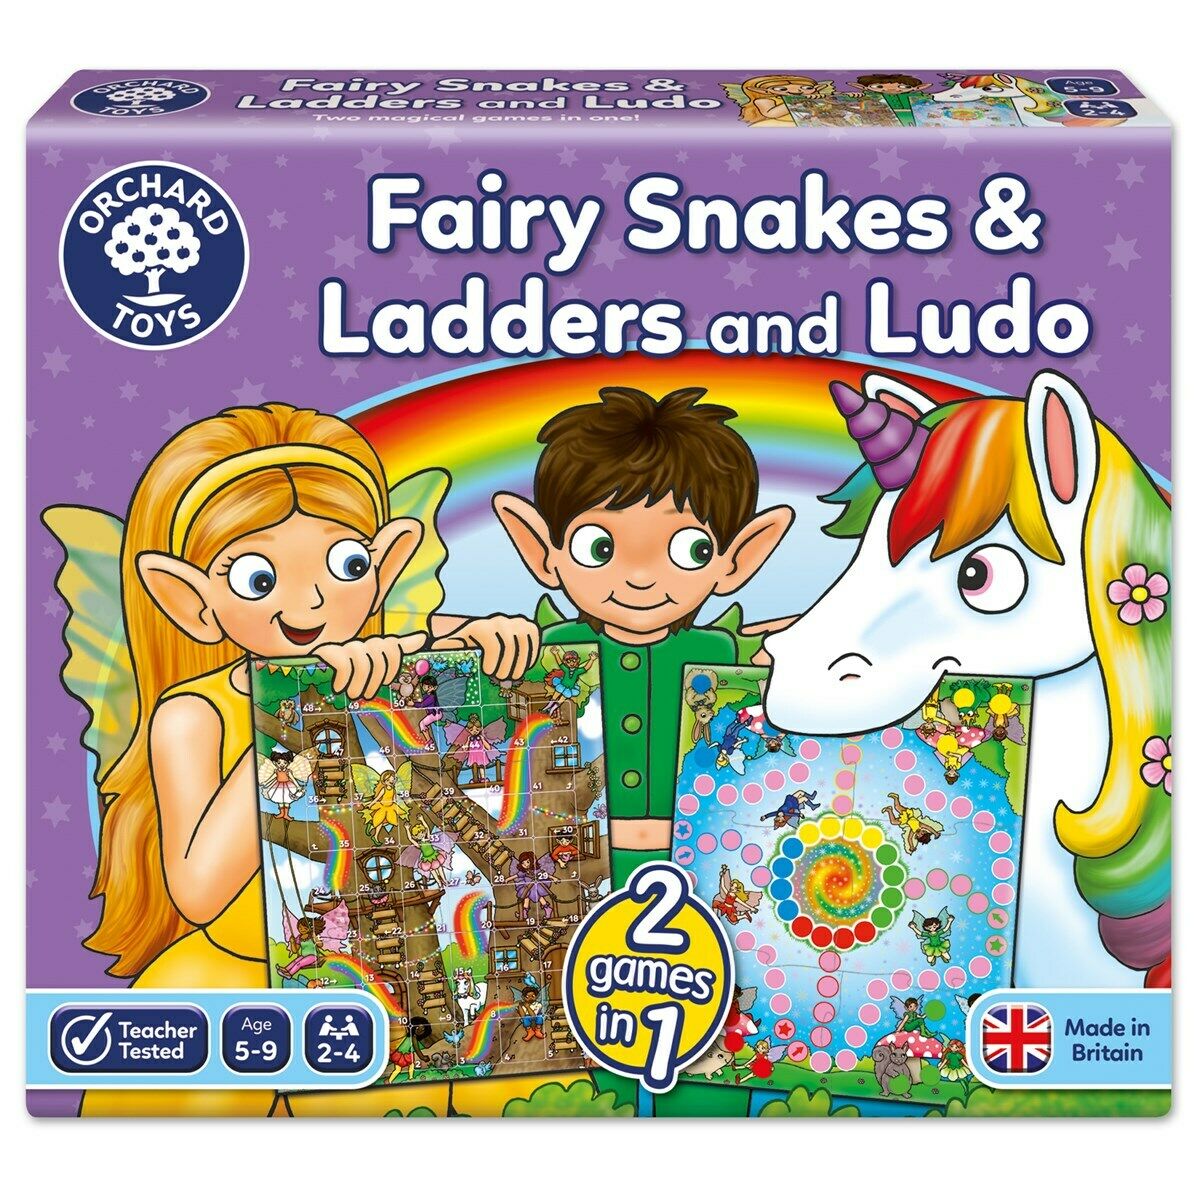 Orchard Toys 059 Fairy Snakes & Ladders & Ludo Board Game Children Age 5 Years+